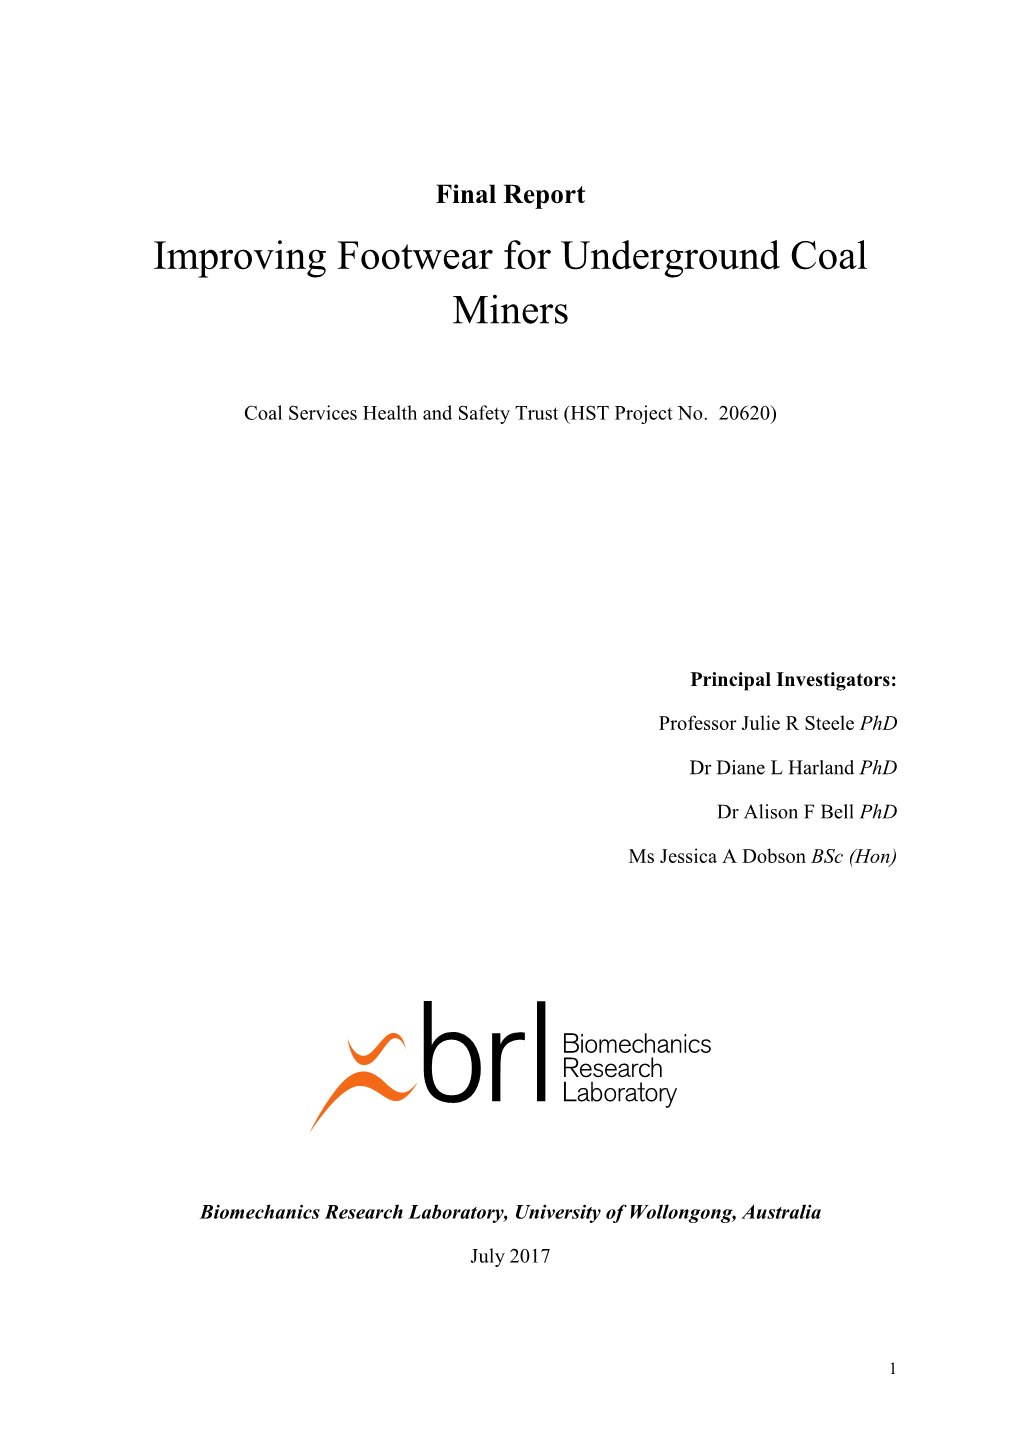 Improving Footwear for Underground Coal Miners